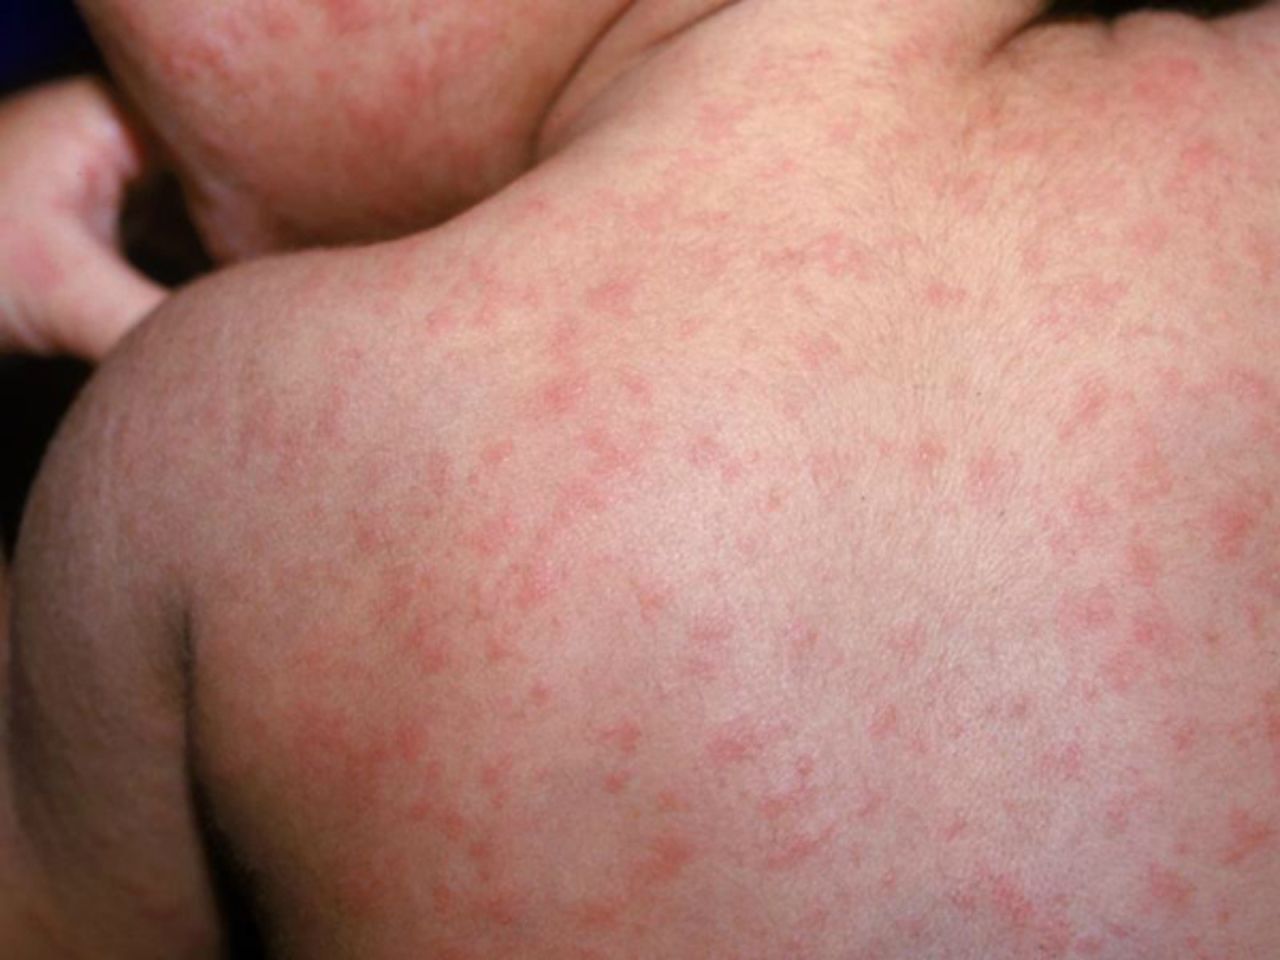 Most U.S. physicians practicing today have never diagnosed measles. The disease was been eradicated in the country in 2000, but cases can be imported from overseas. Pictured, measles in a child.